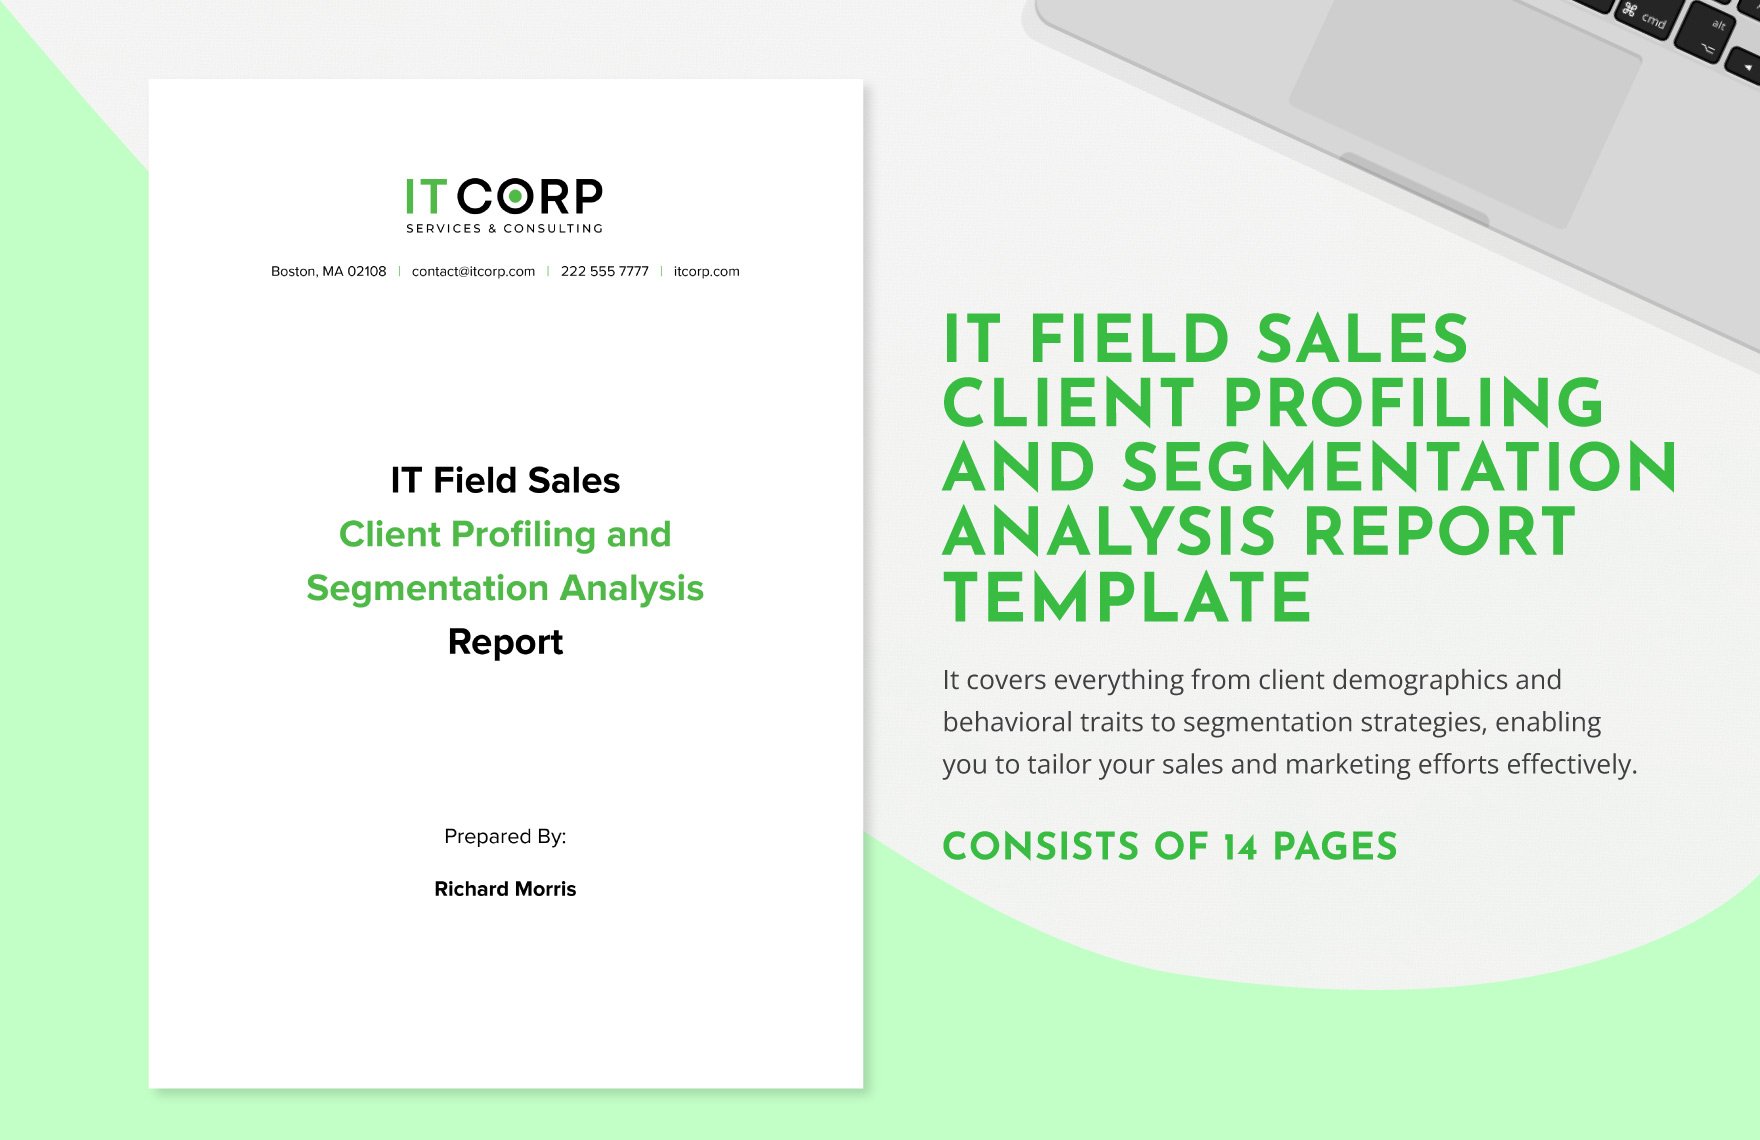 IT Field Sales Client Profiling and Segmentation Analysis Report Template in Word, Google Docs, PDF